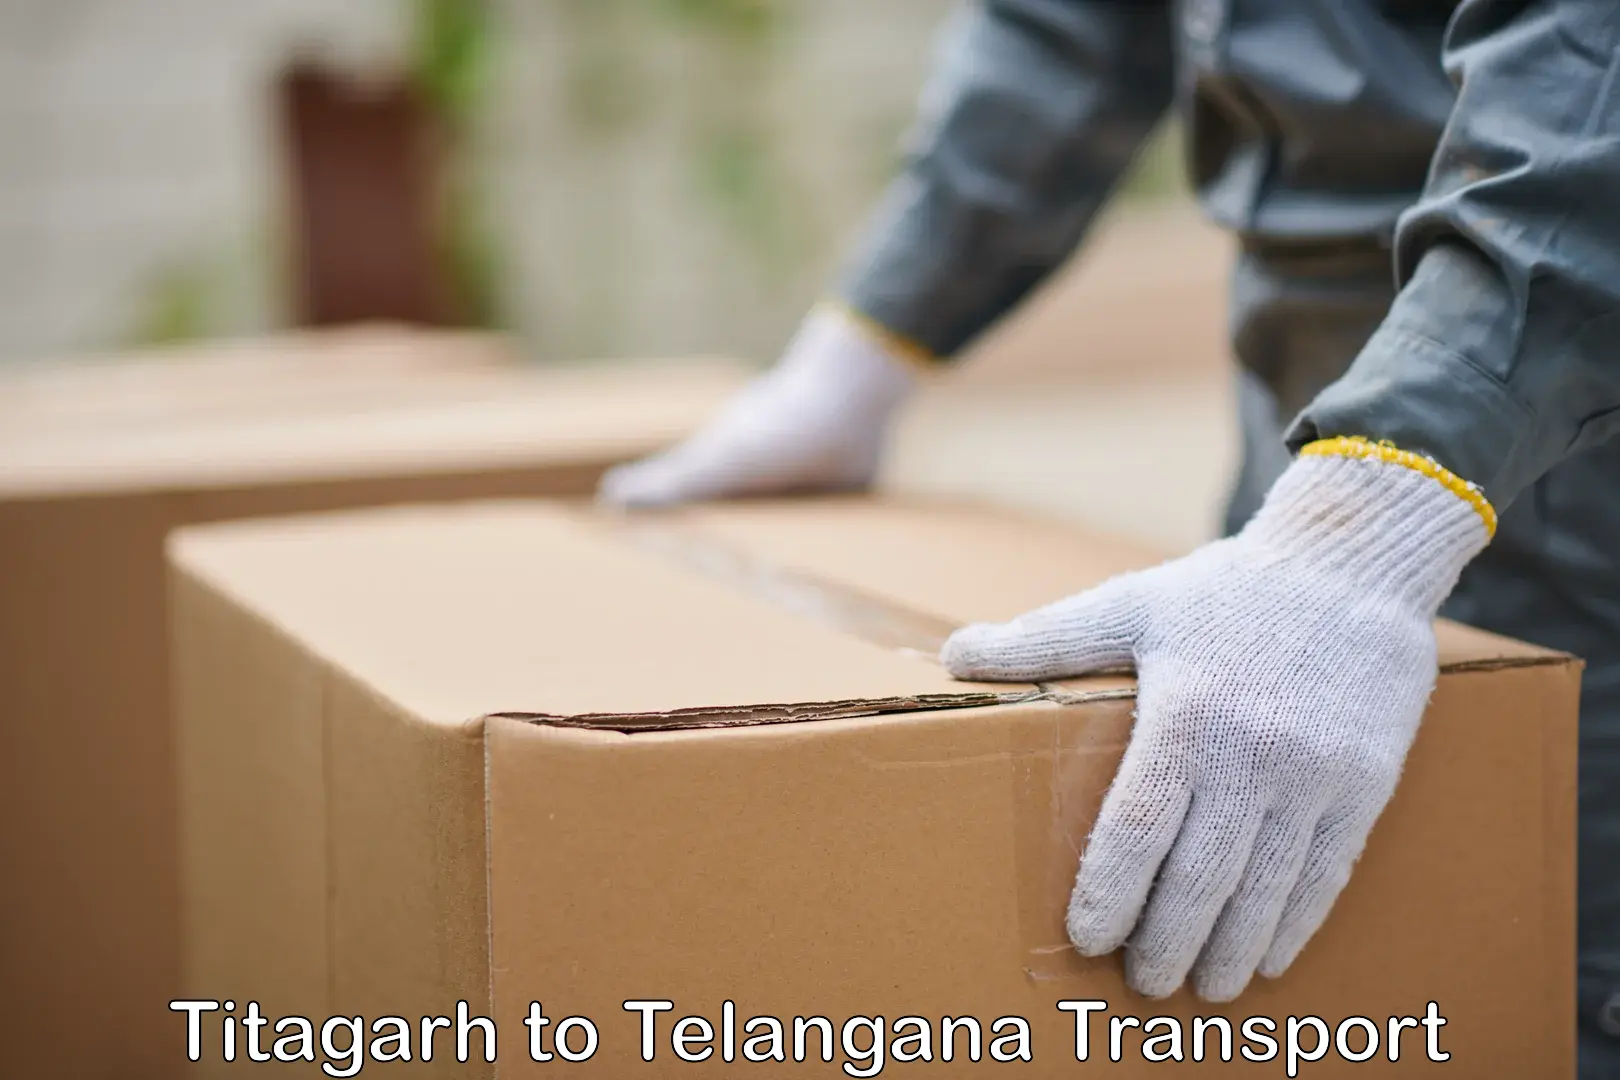 Road transport online services Titagarh to International Institute of Information Technology Hyderabad